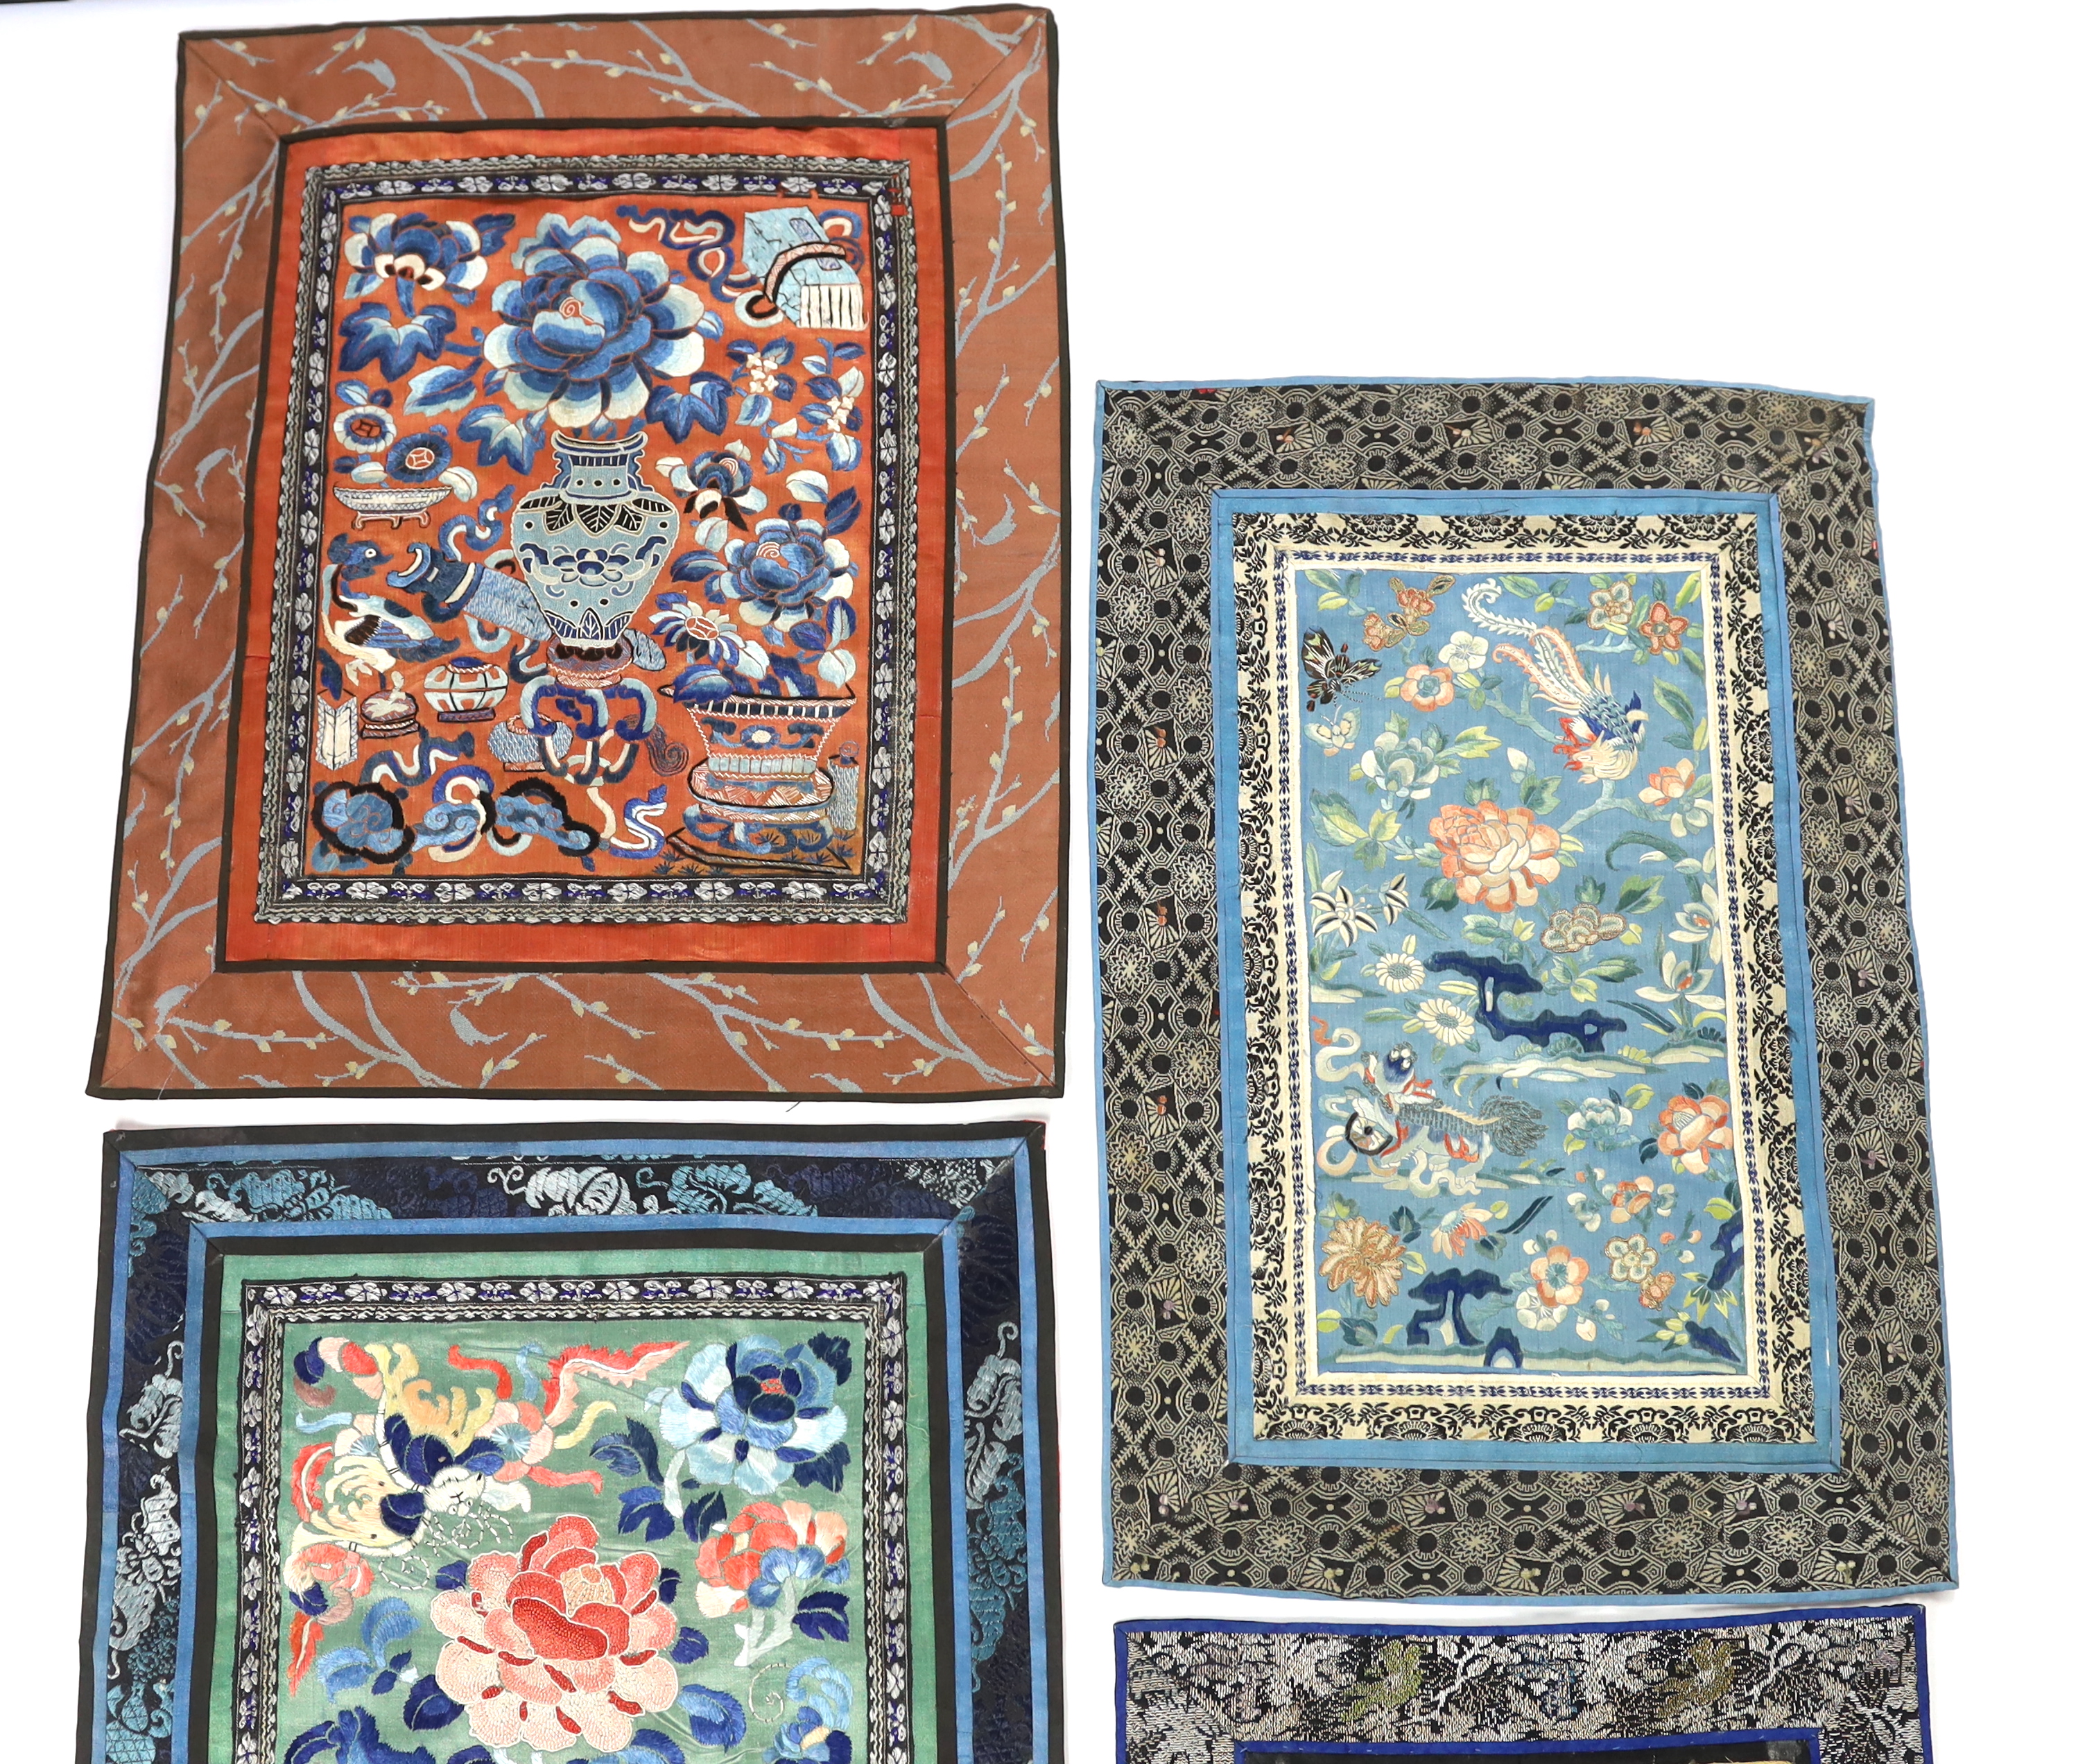 Five Chinese late Qing dynasty silk embroidered panels, two being embroidered with Beijing knot, a pair of metallic embroidered with phoenix sleeve bands, the other embroidered with butterflies and flowers, all five pane